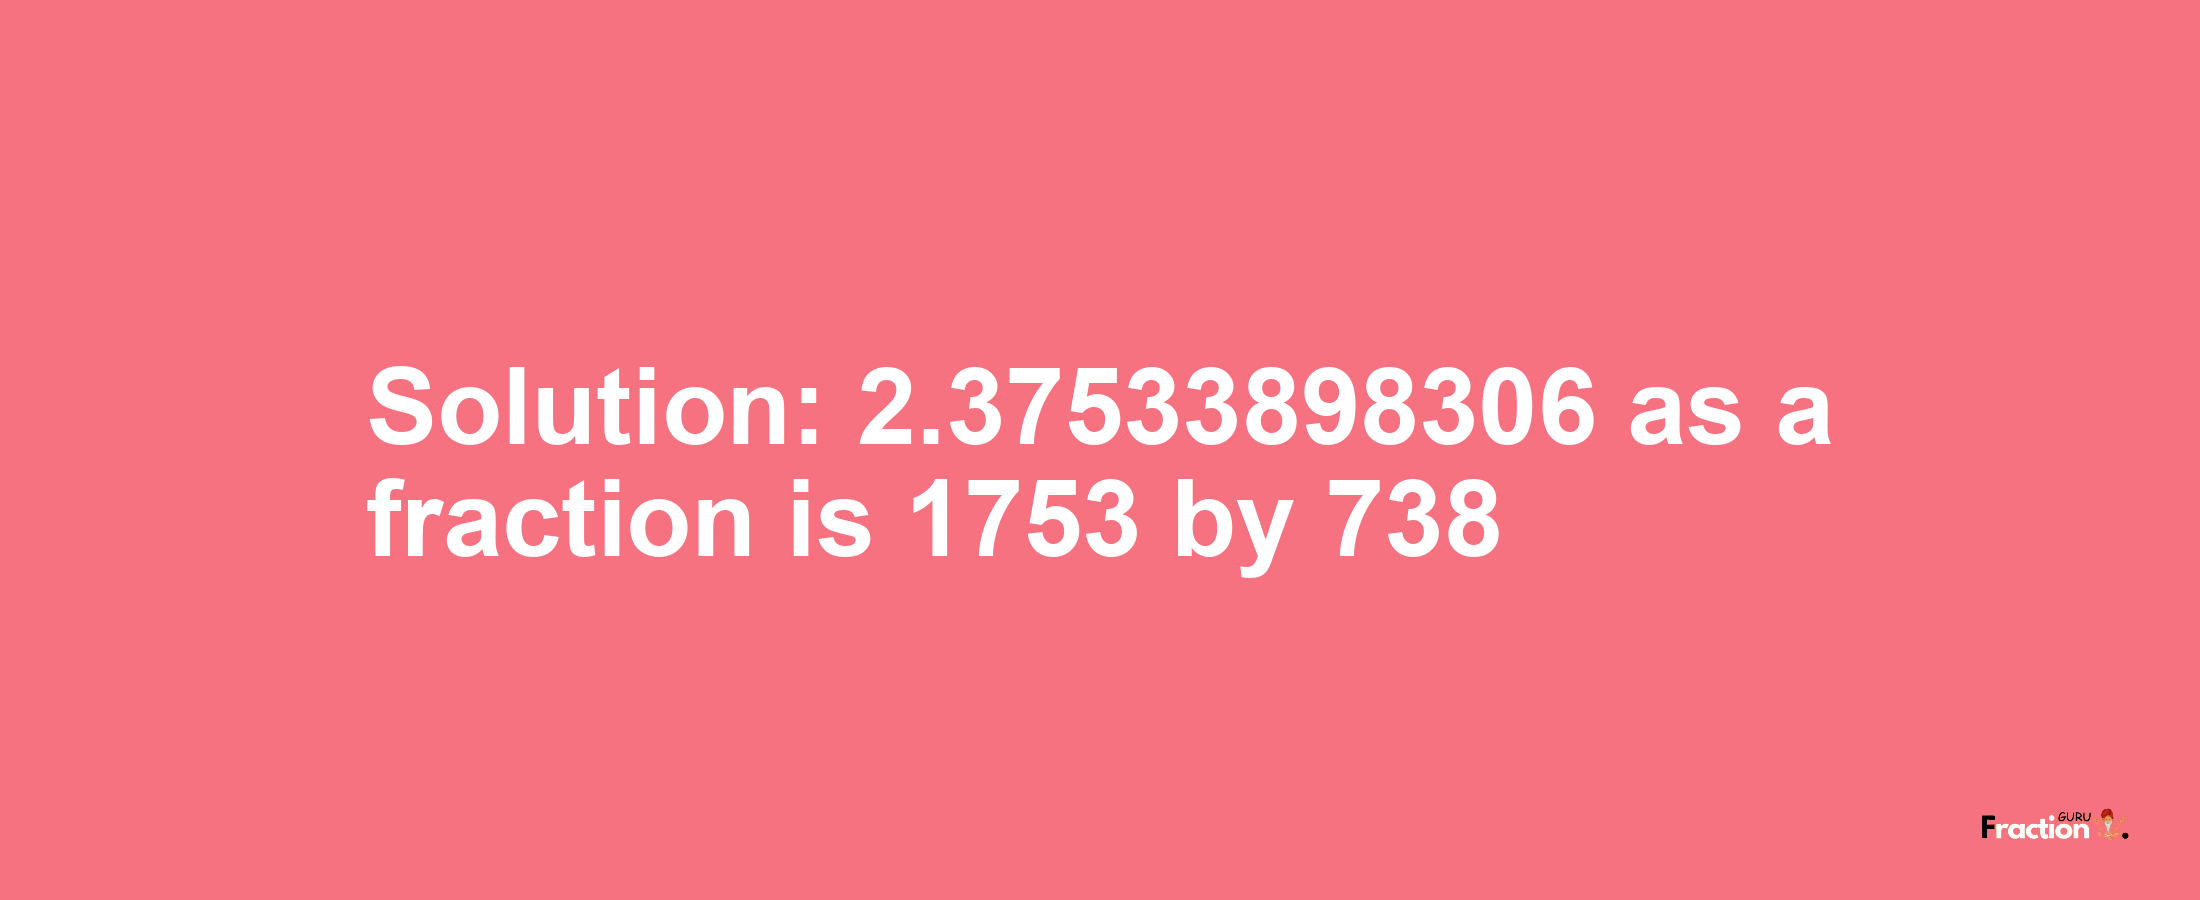 Solution:2.37533898306 as a fraction is 1753/738